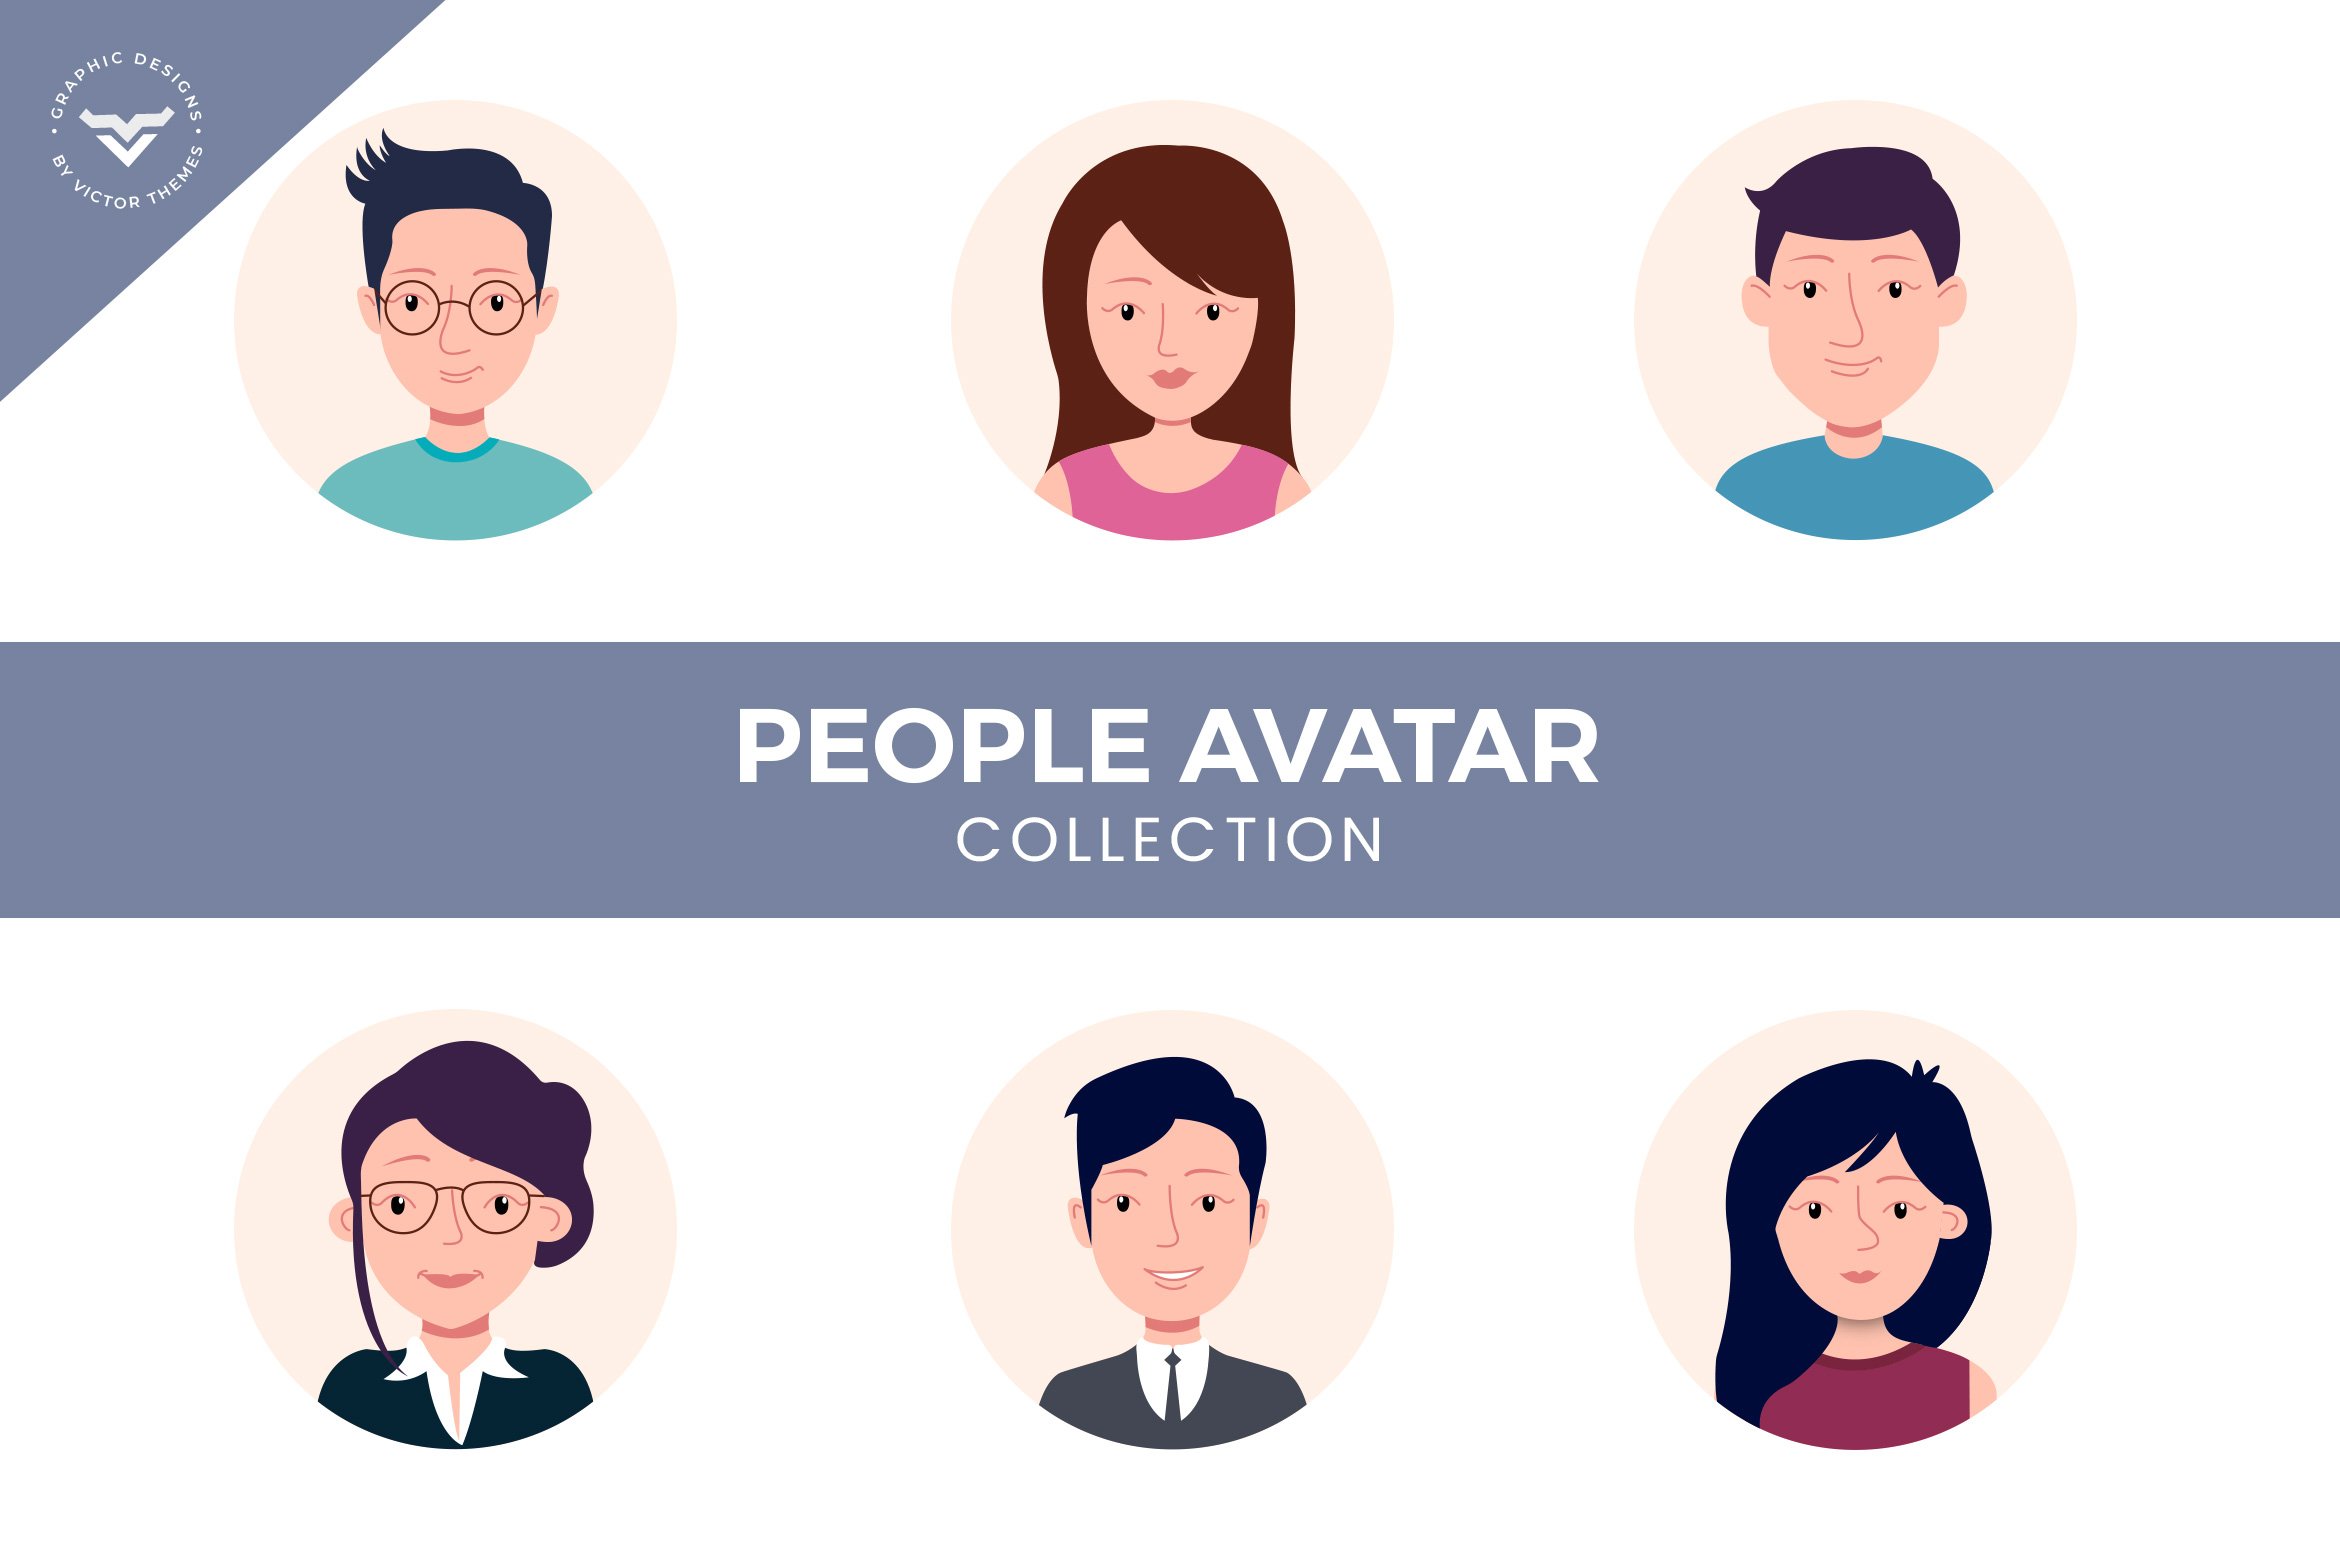 Avatar Collection